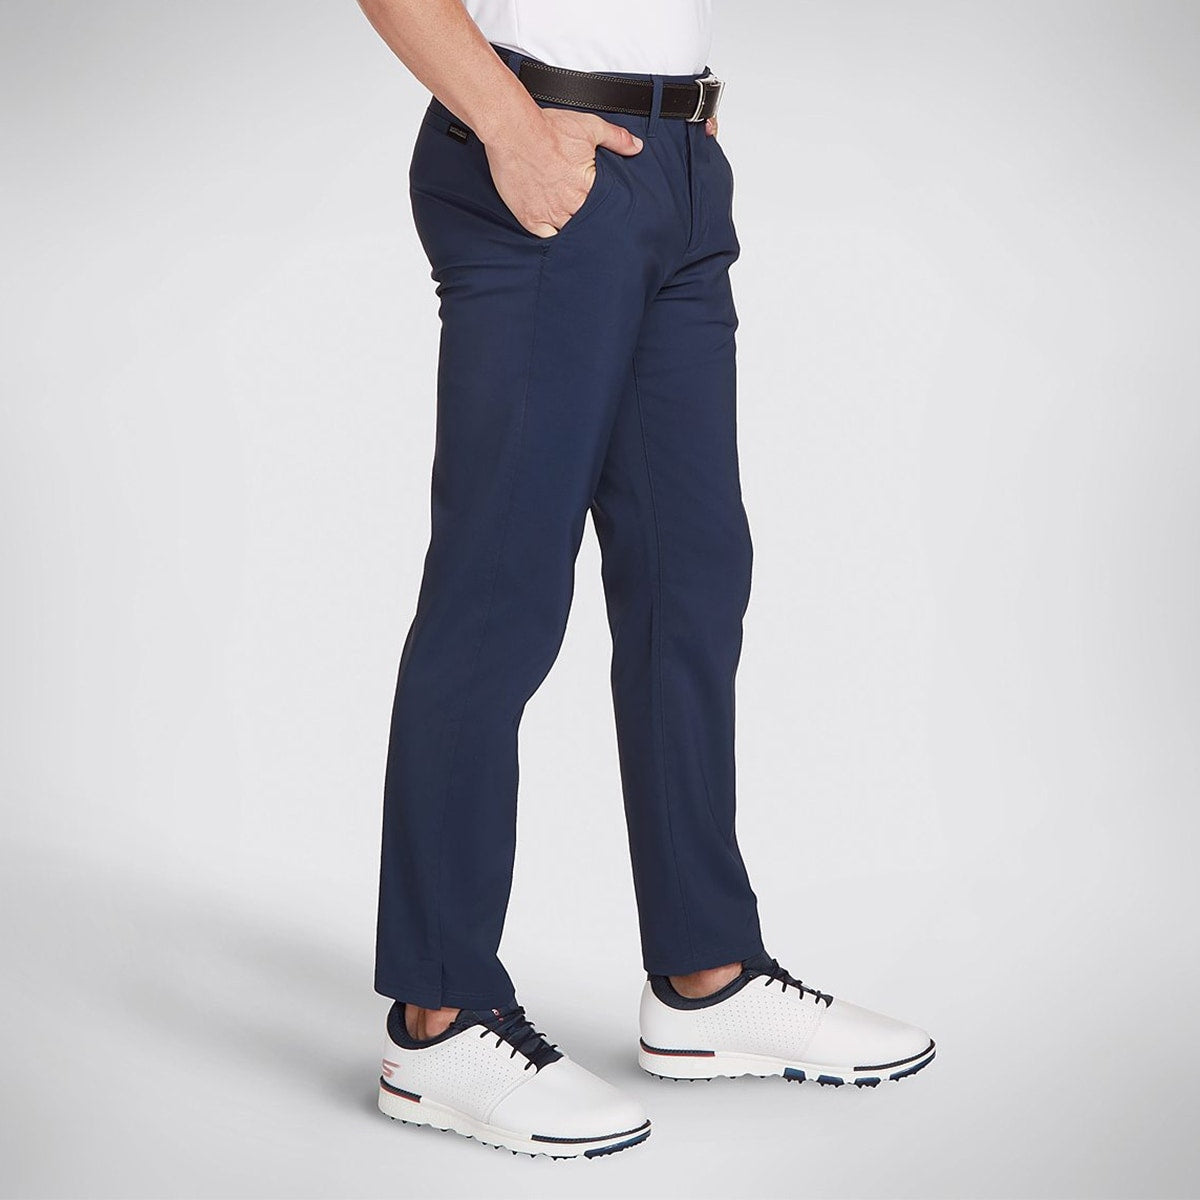 Skechers Mens Eagle On 10 Pant Golf Wicking Stretch Breathable Trouser -  Just Golf Online